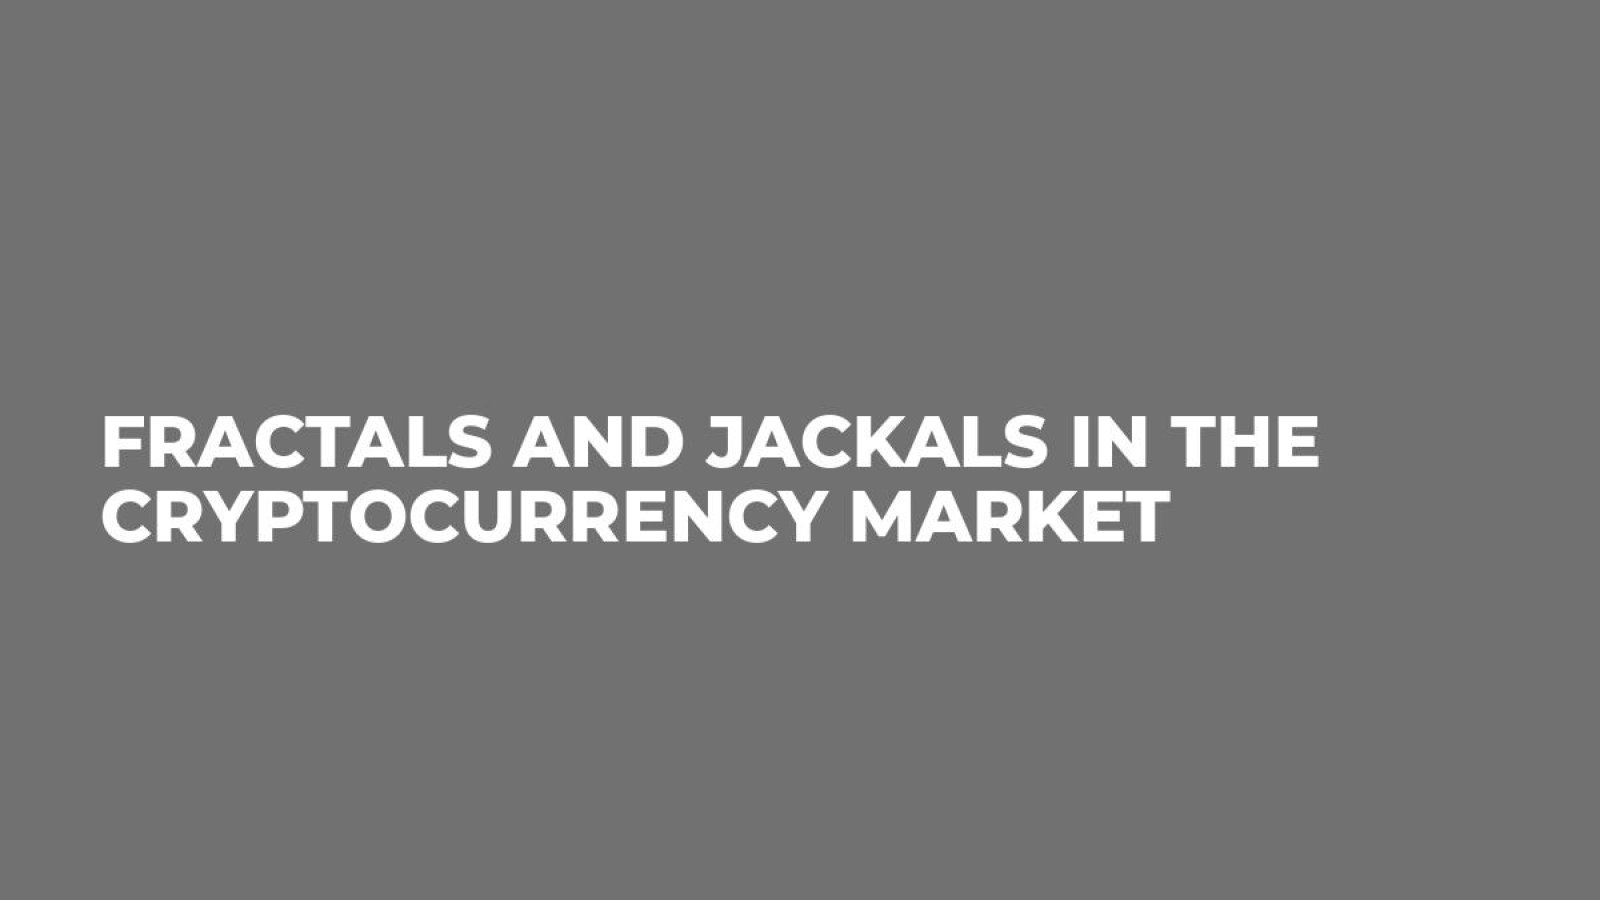 Fractals and Jackals in the Cryptocurrency Market